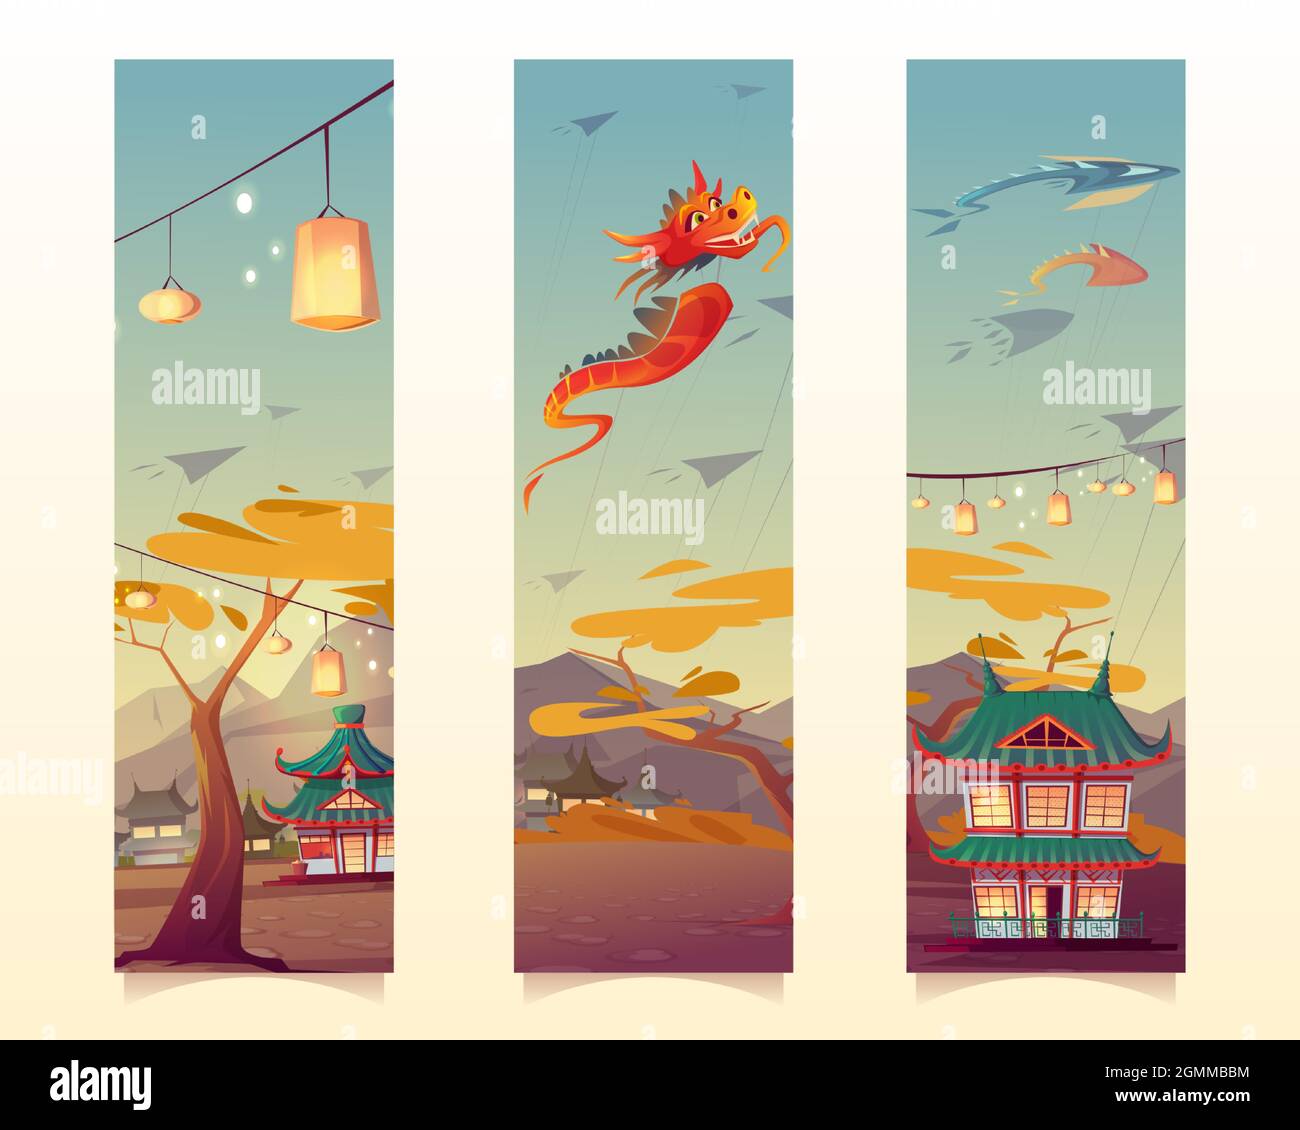 Chinese festival with lanterns and flying kites in shape of dragon and fish. Vector vertical banners or bookmarks with cartoon illustration of village with traditional houses in China Stock Vector